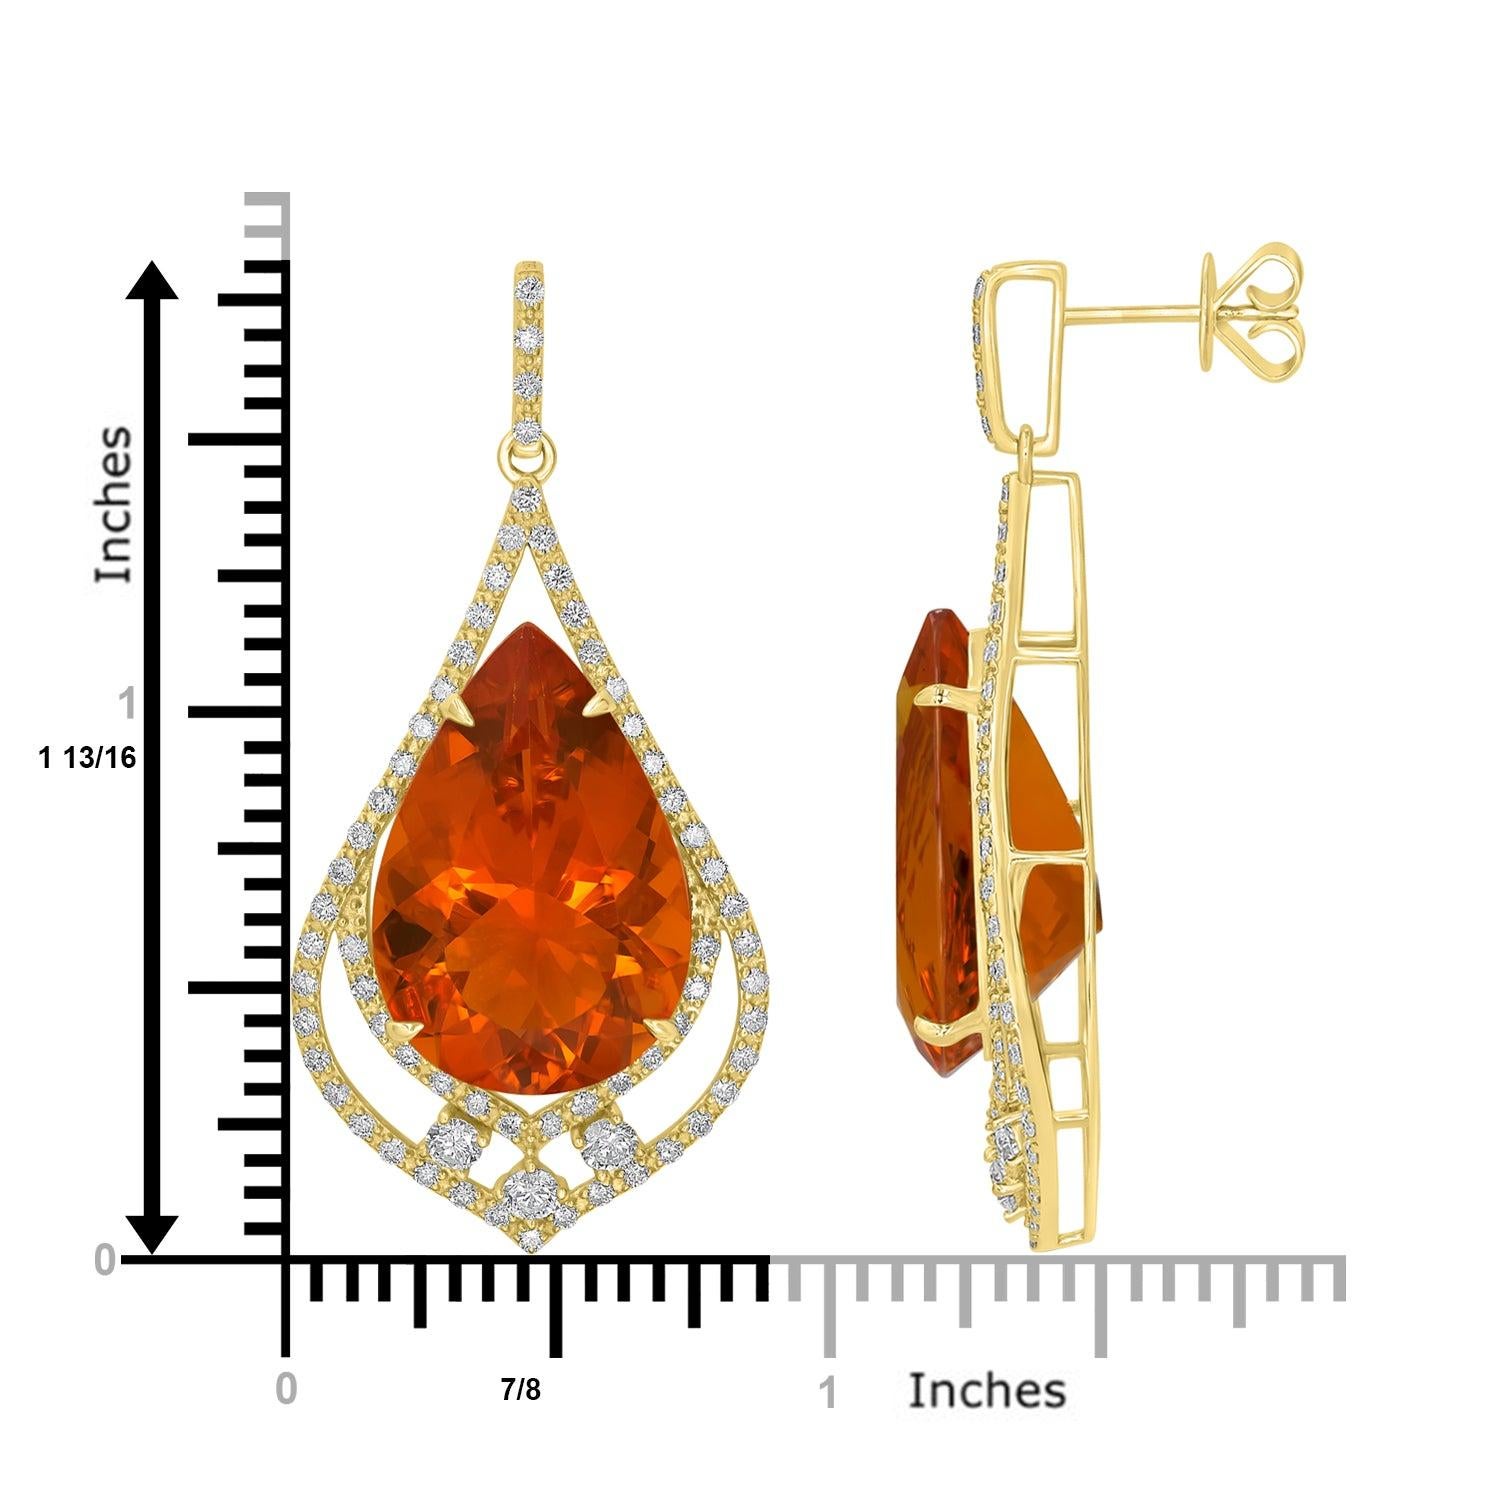 Set with a gorgeous pear-cut fire Opal, these exquisite earrings are crafted of 18K yellow gold for a rich finish. The sparkle of the splendid round Diamond imparts a stunning look.

20.97tct Fire Opal Earring
1.72tct Diamonds set
18K Yellow Gold